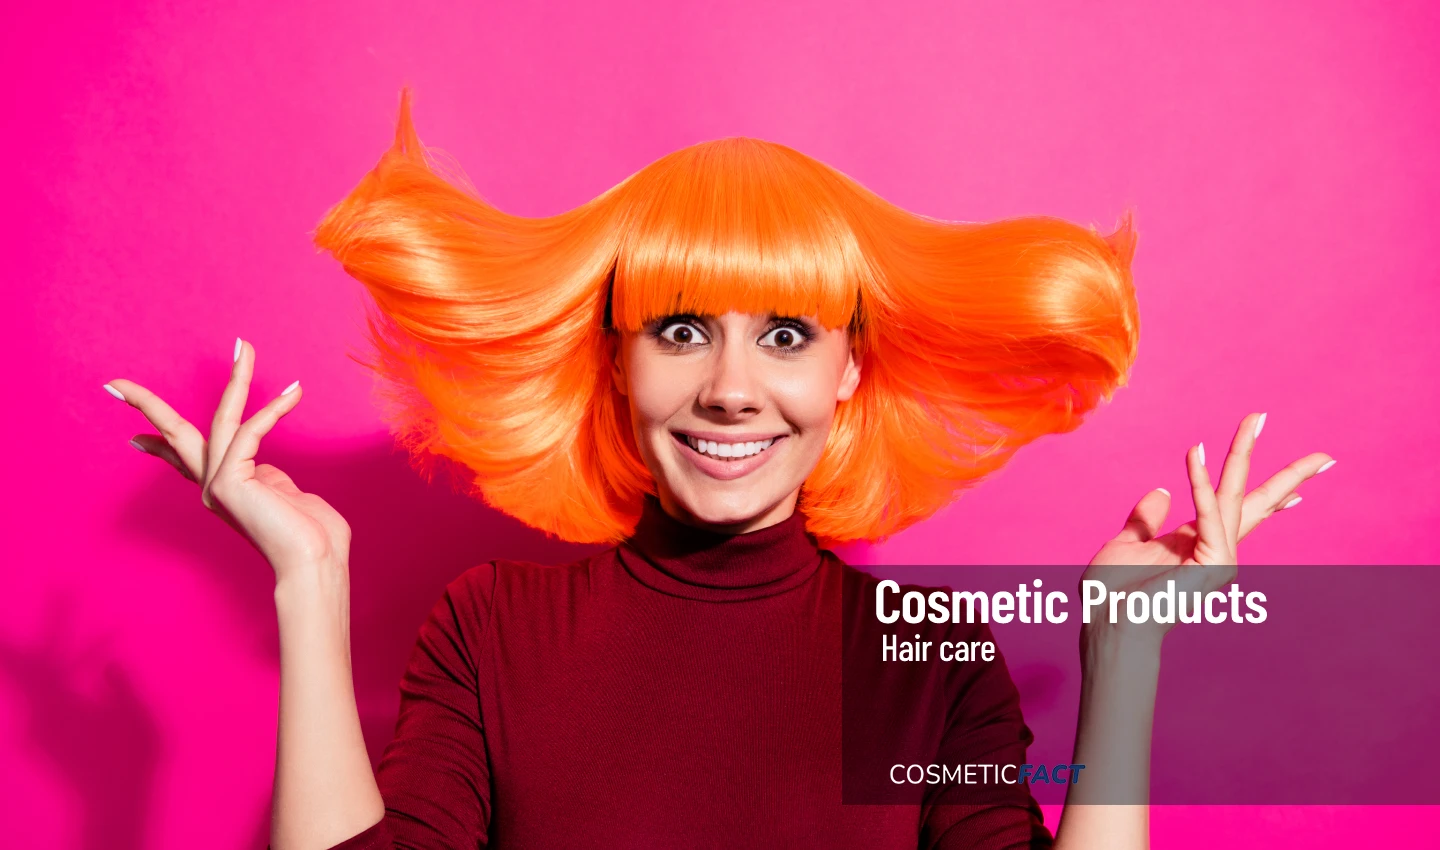 A woman with vibrant orange hair looks happy and confident, showcasing the transformative power of bold hair hues for a striking new look.